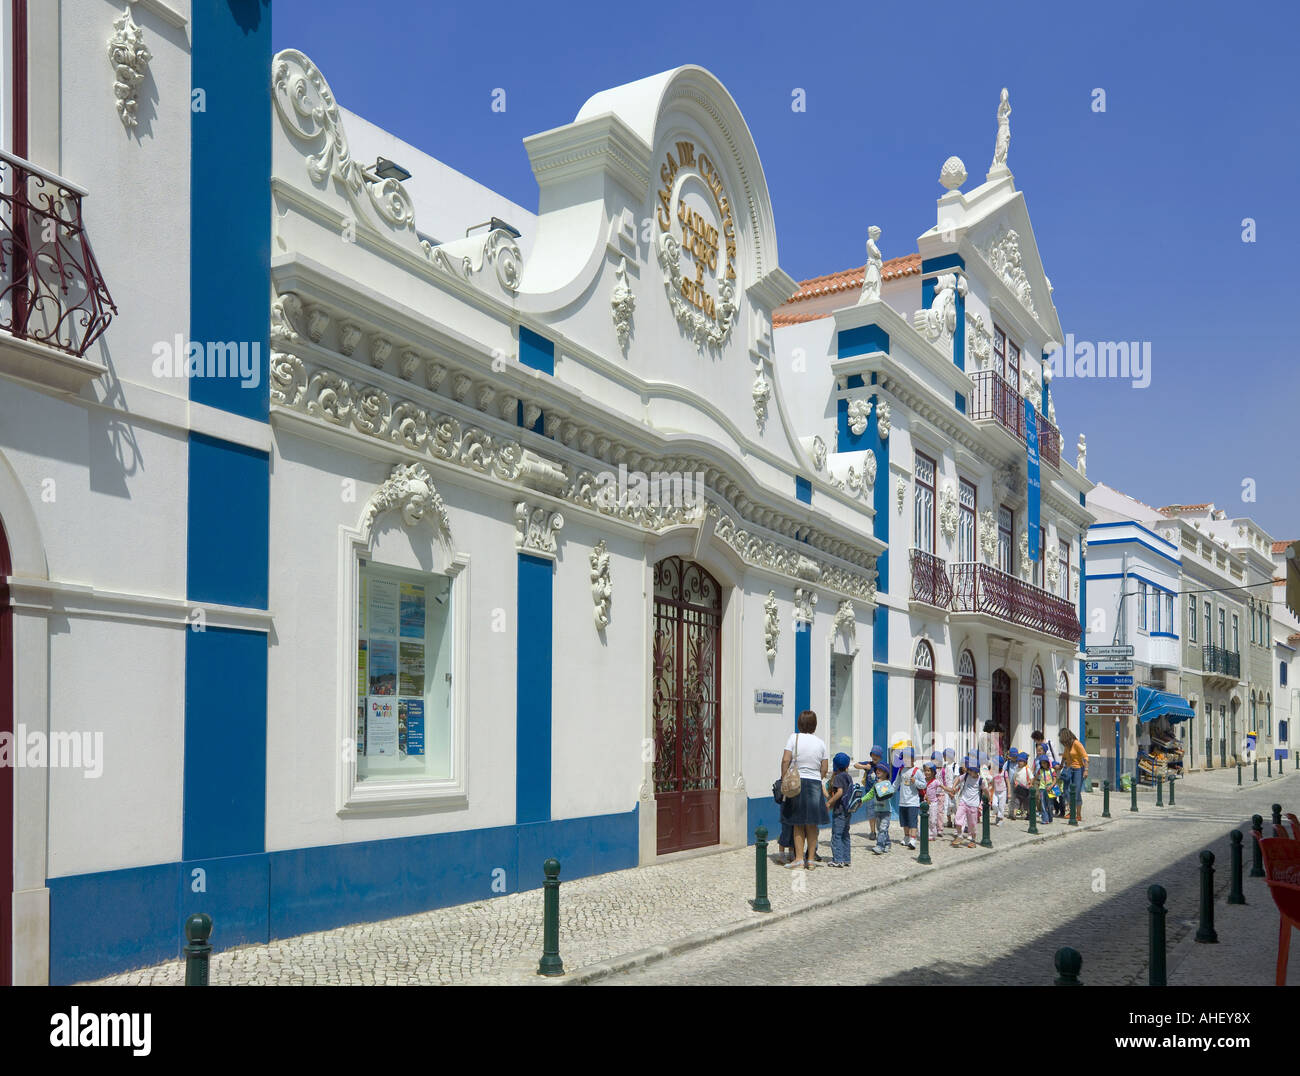 Portugal, the Costa de Lisboa, Ericeira, street scene with the cultural centre and art gallery Stock Photo